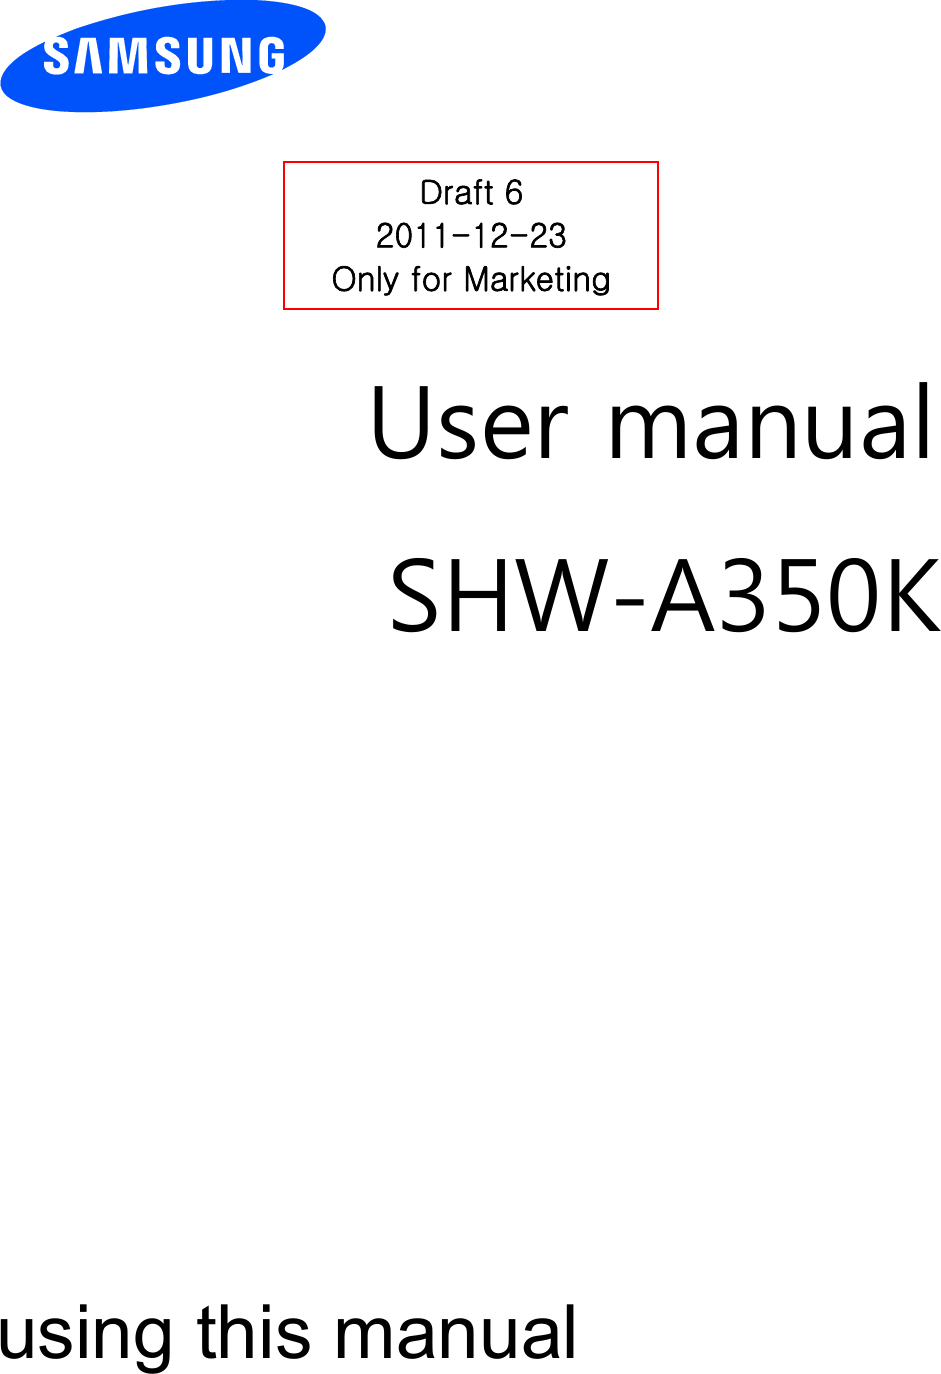         User manual SHW-A350K                  using this manual Draft 6 2011-12-23 Only for Marketing 